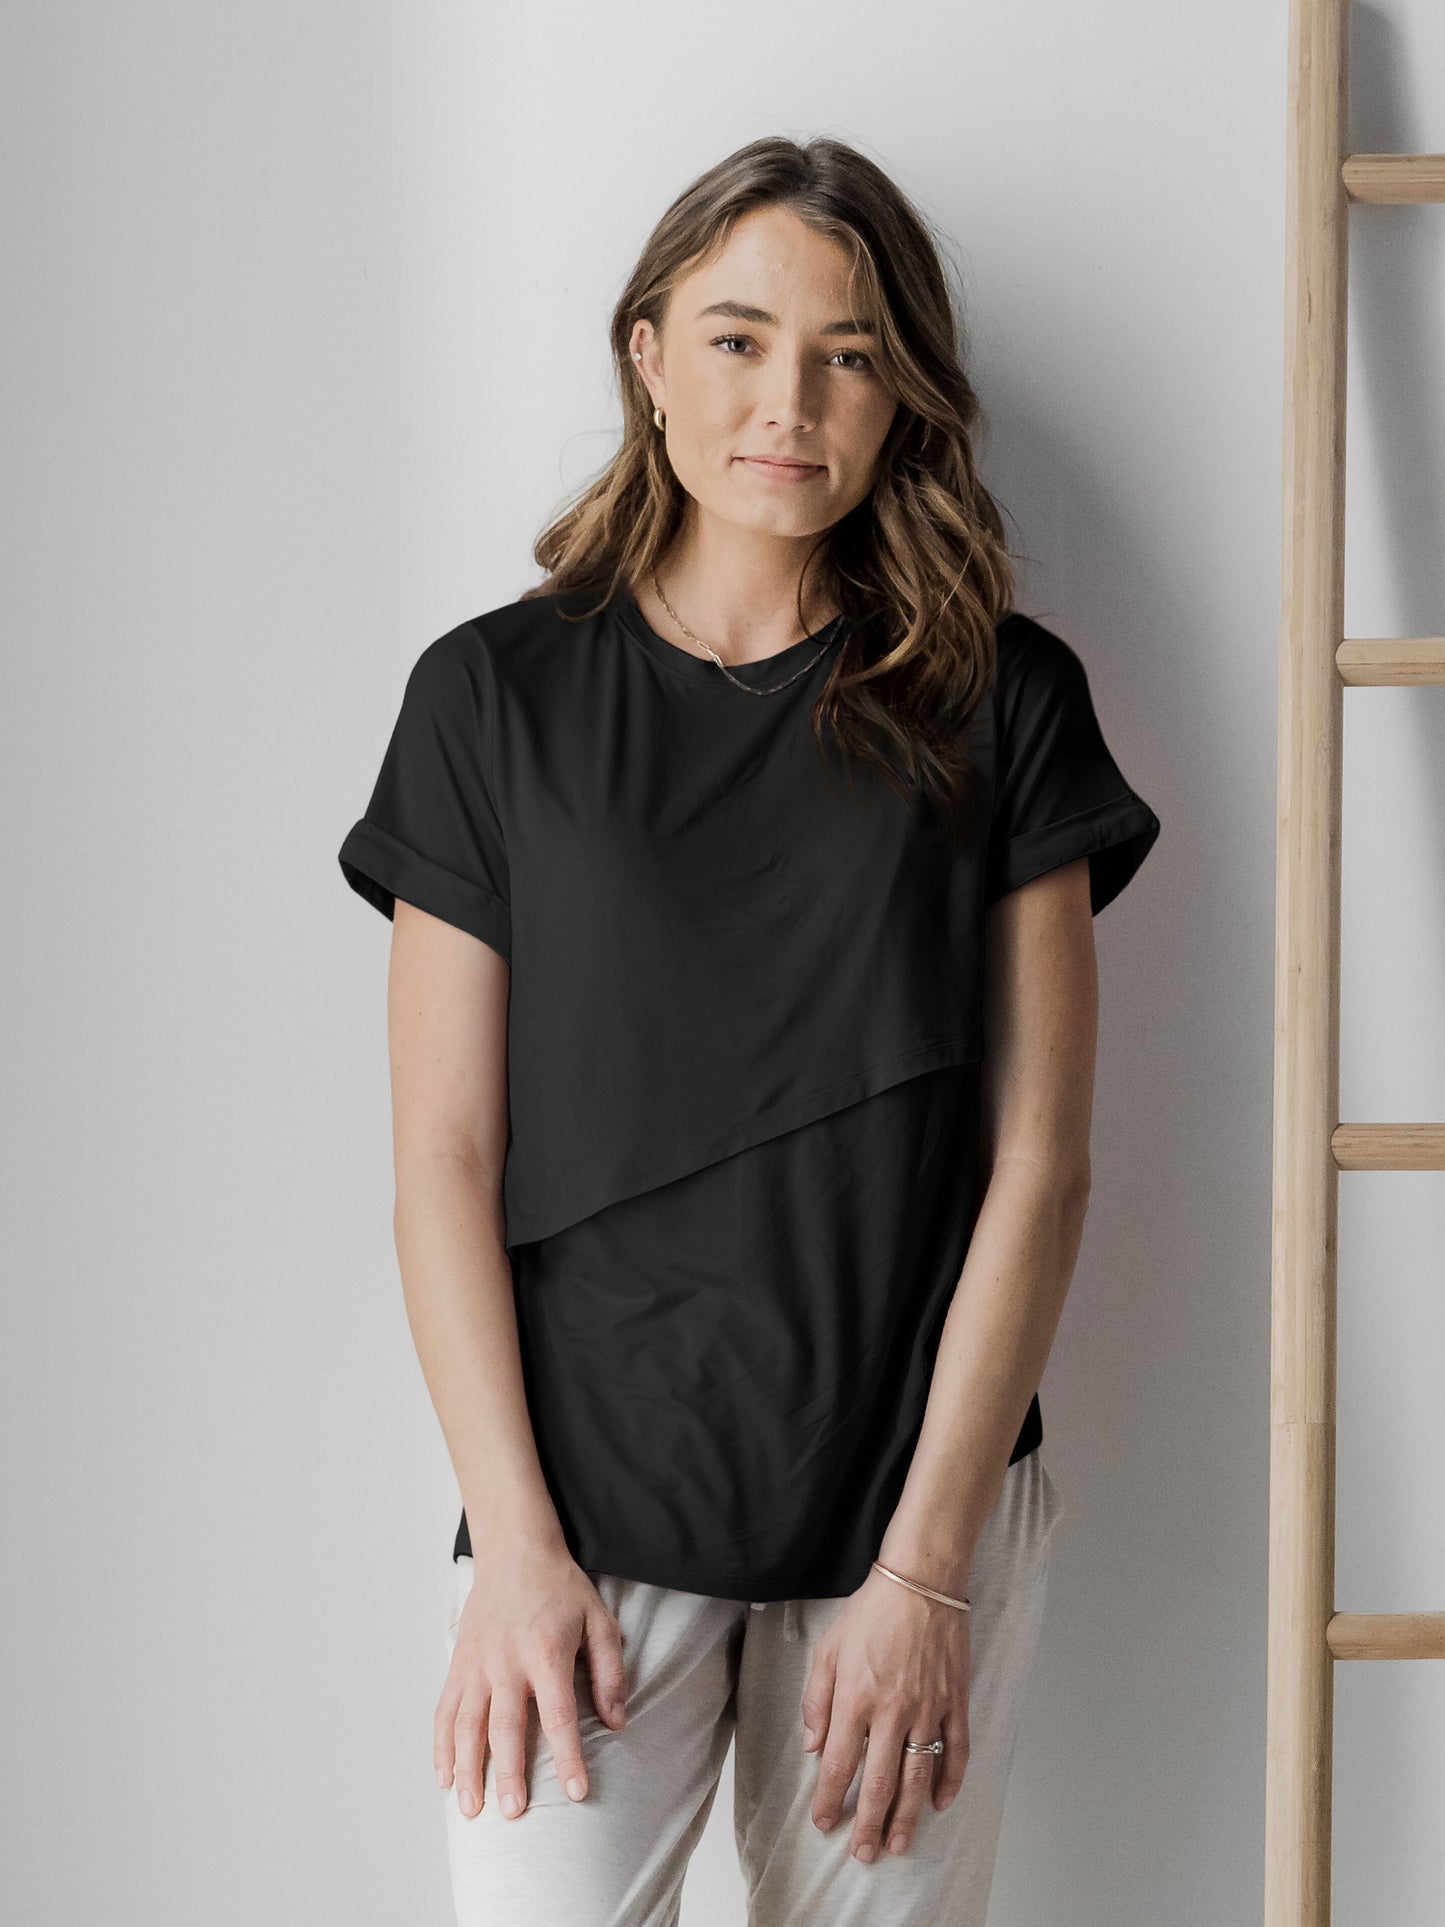 Model standing against the wall wearing the Everyday Asymmetrical Nursing T-Shirt in Black